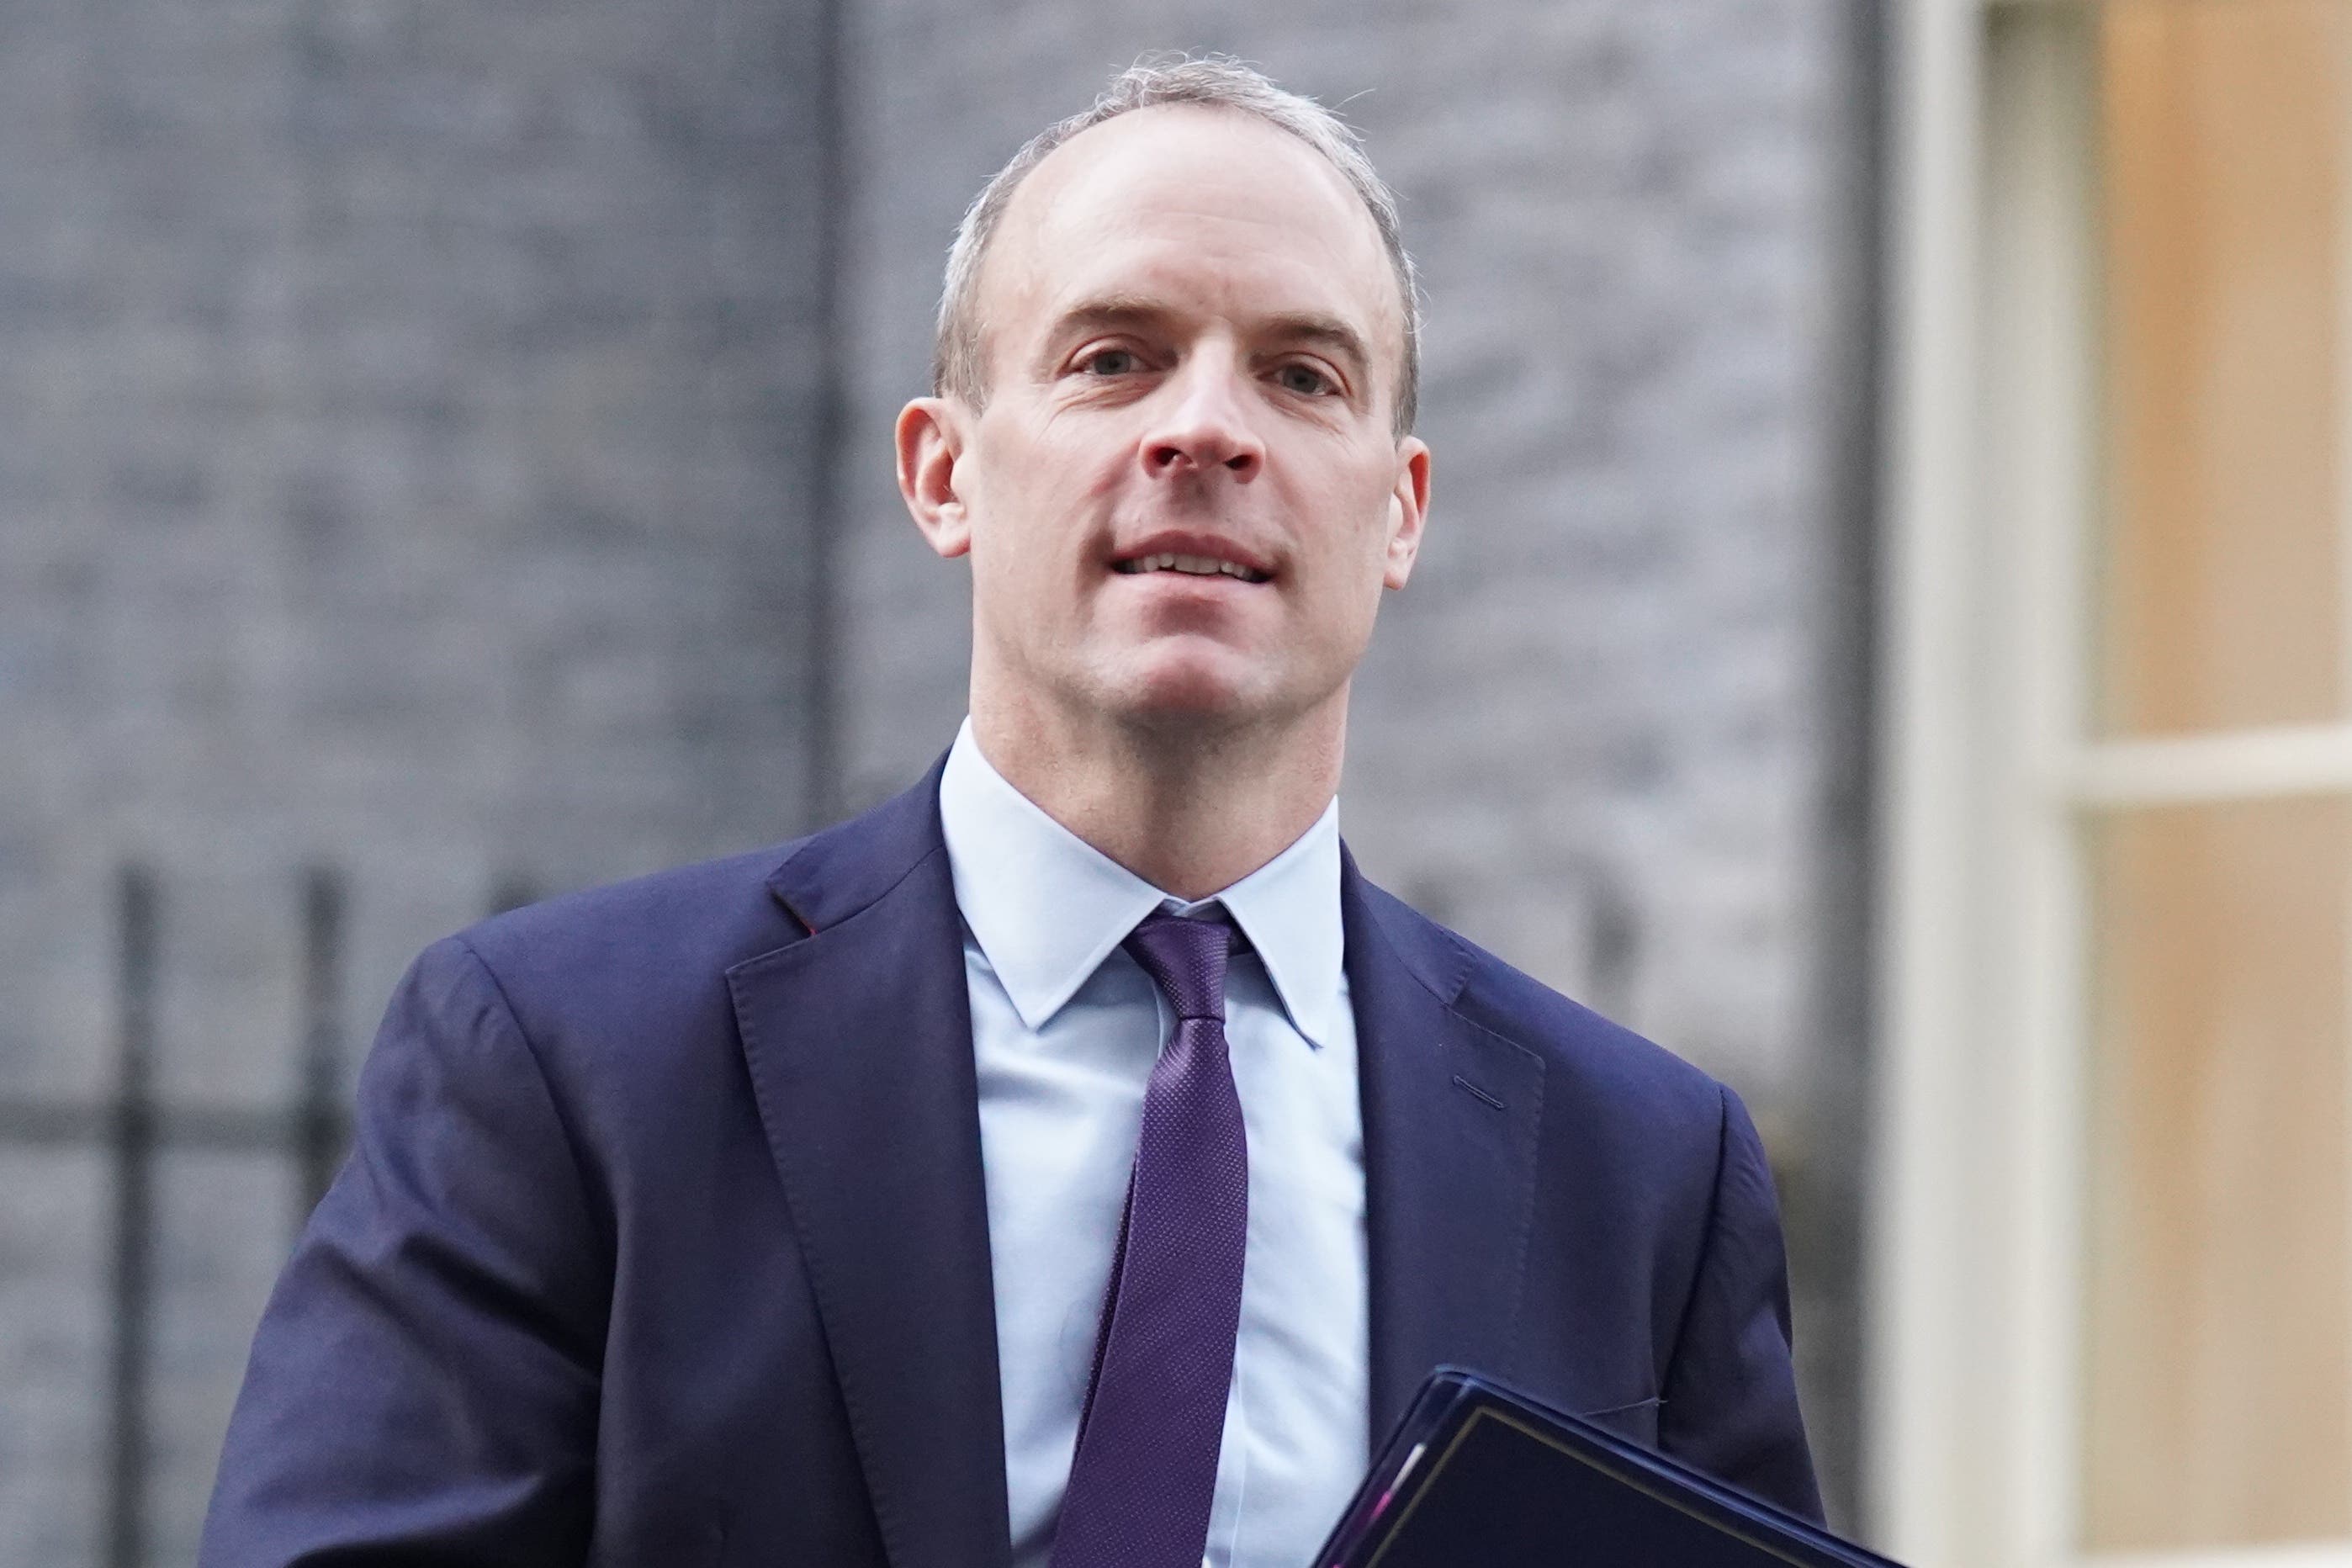 Dominic Raab, Justice Secretary and Deputy Prime Minister, is accused of bullying staff (James Manning/PA)